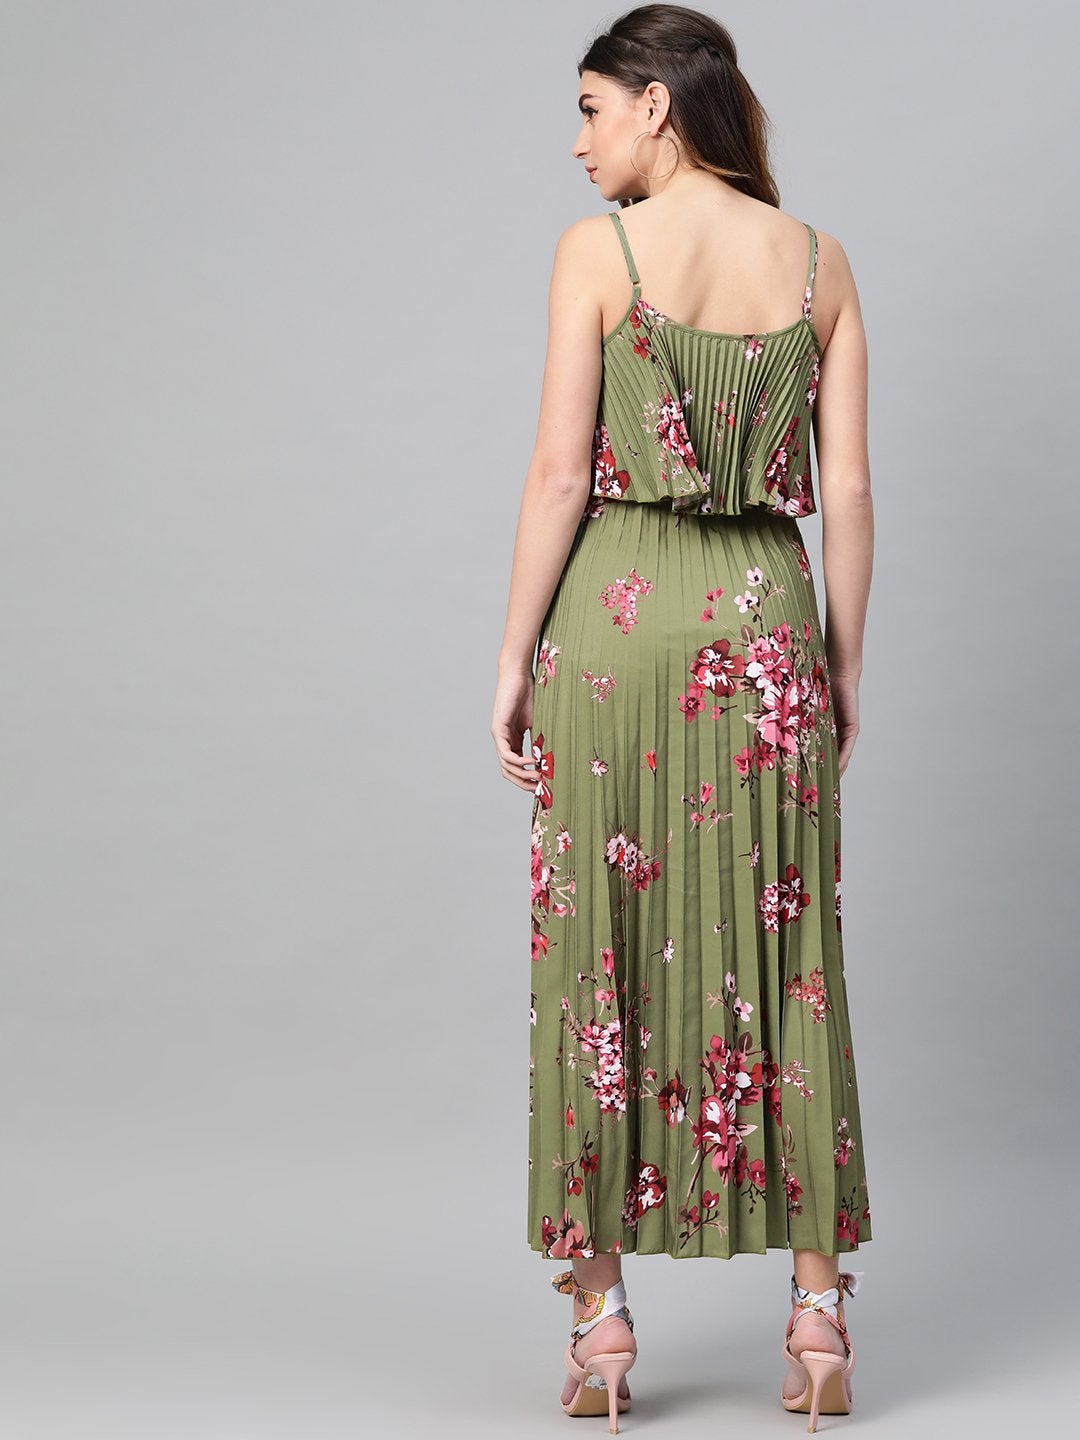 Women's Olive Floral Strappy Pleated Maxi Dress - SASSAFRAS